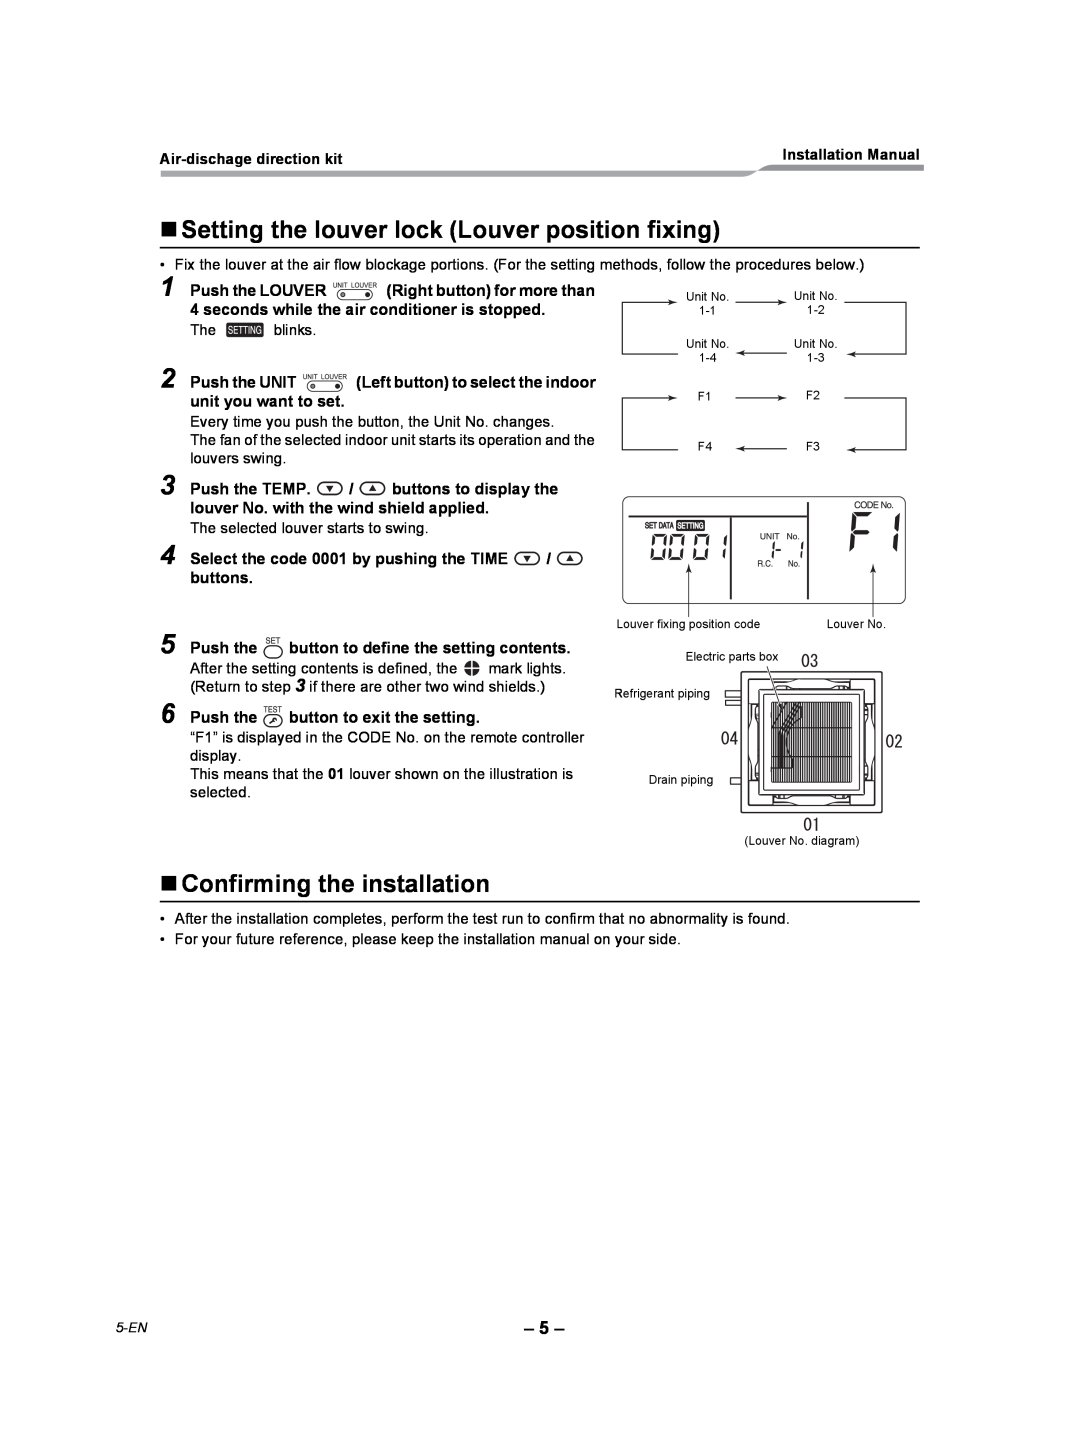 Toshiba TCB-BC1602UUL installation manual „Setting the louver lock Louver position fixing, „Confirming the installation 